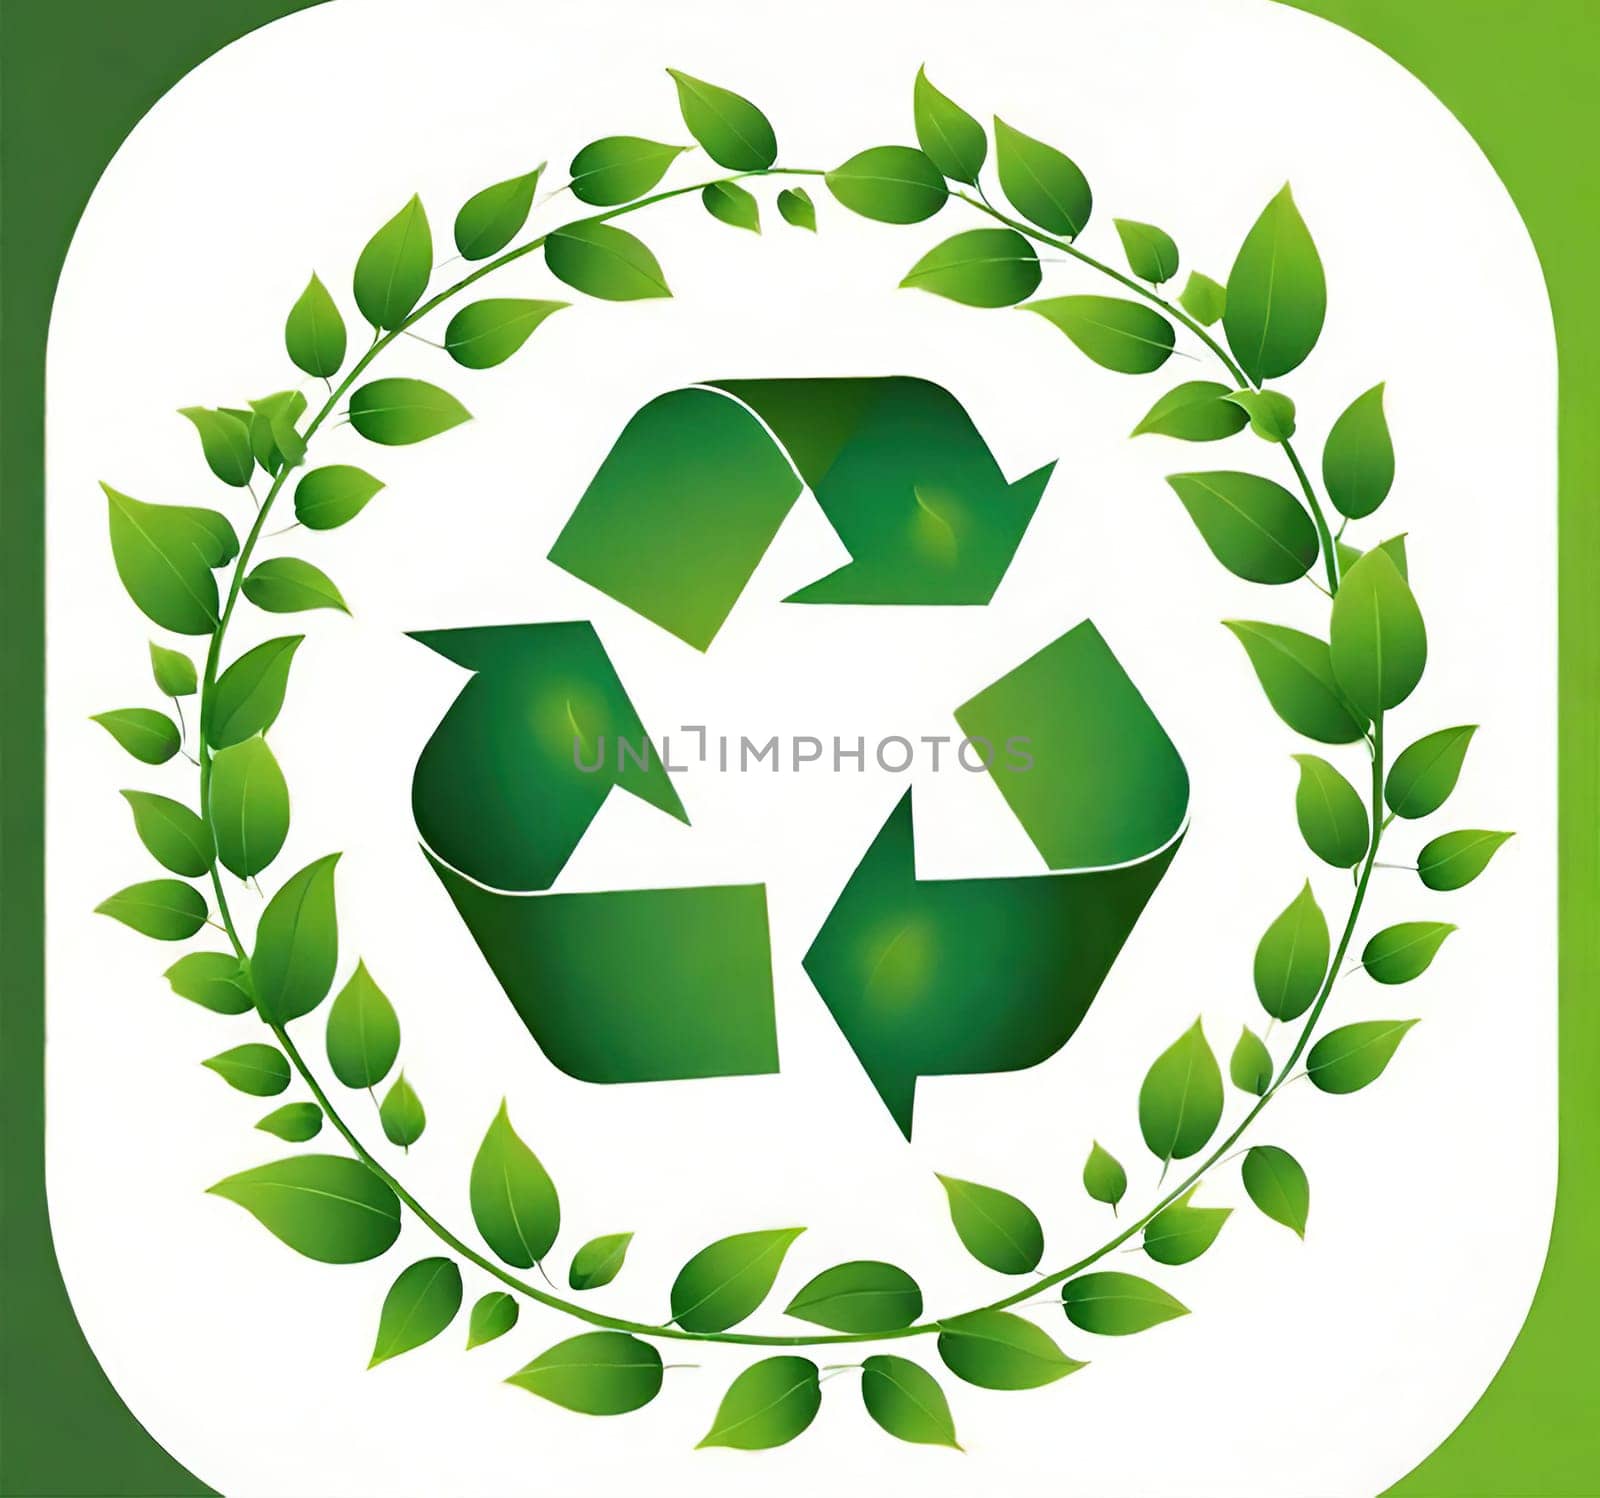 Recycling symbol with green leaves. Vector illustration.Ecology design over white background. Recycling concept and green leaves, vector illustration. Globe and ecology concept.